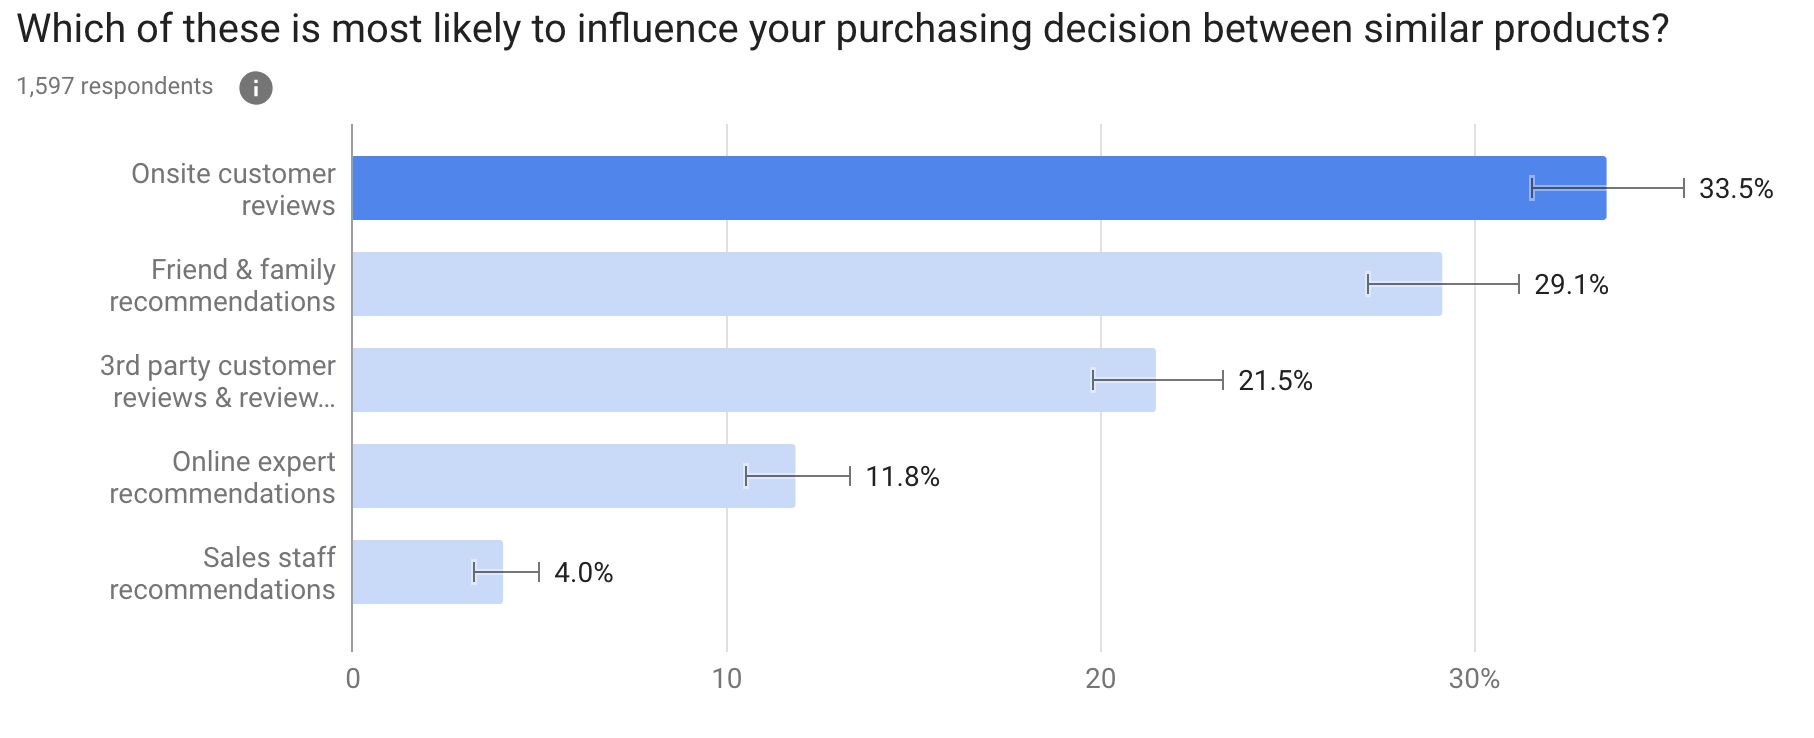 Which of these is most likely to influence your purchasing decision between similar products?